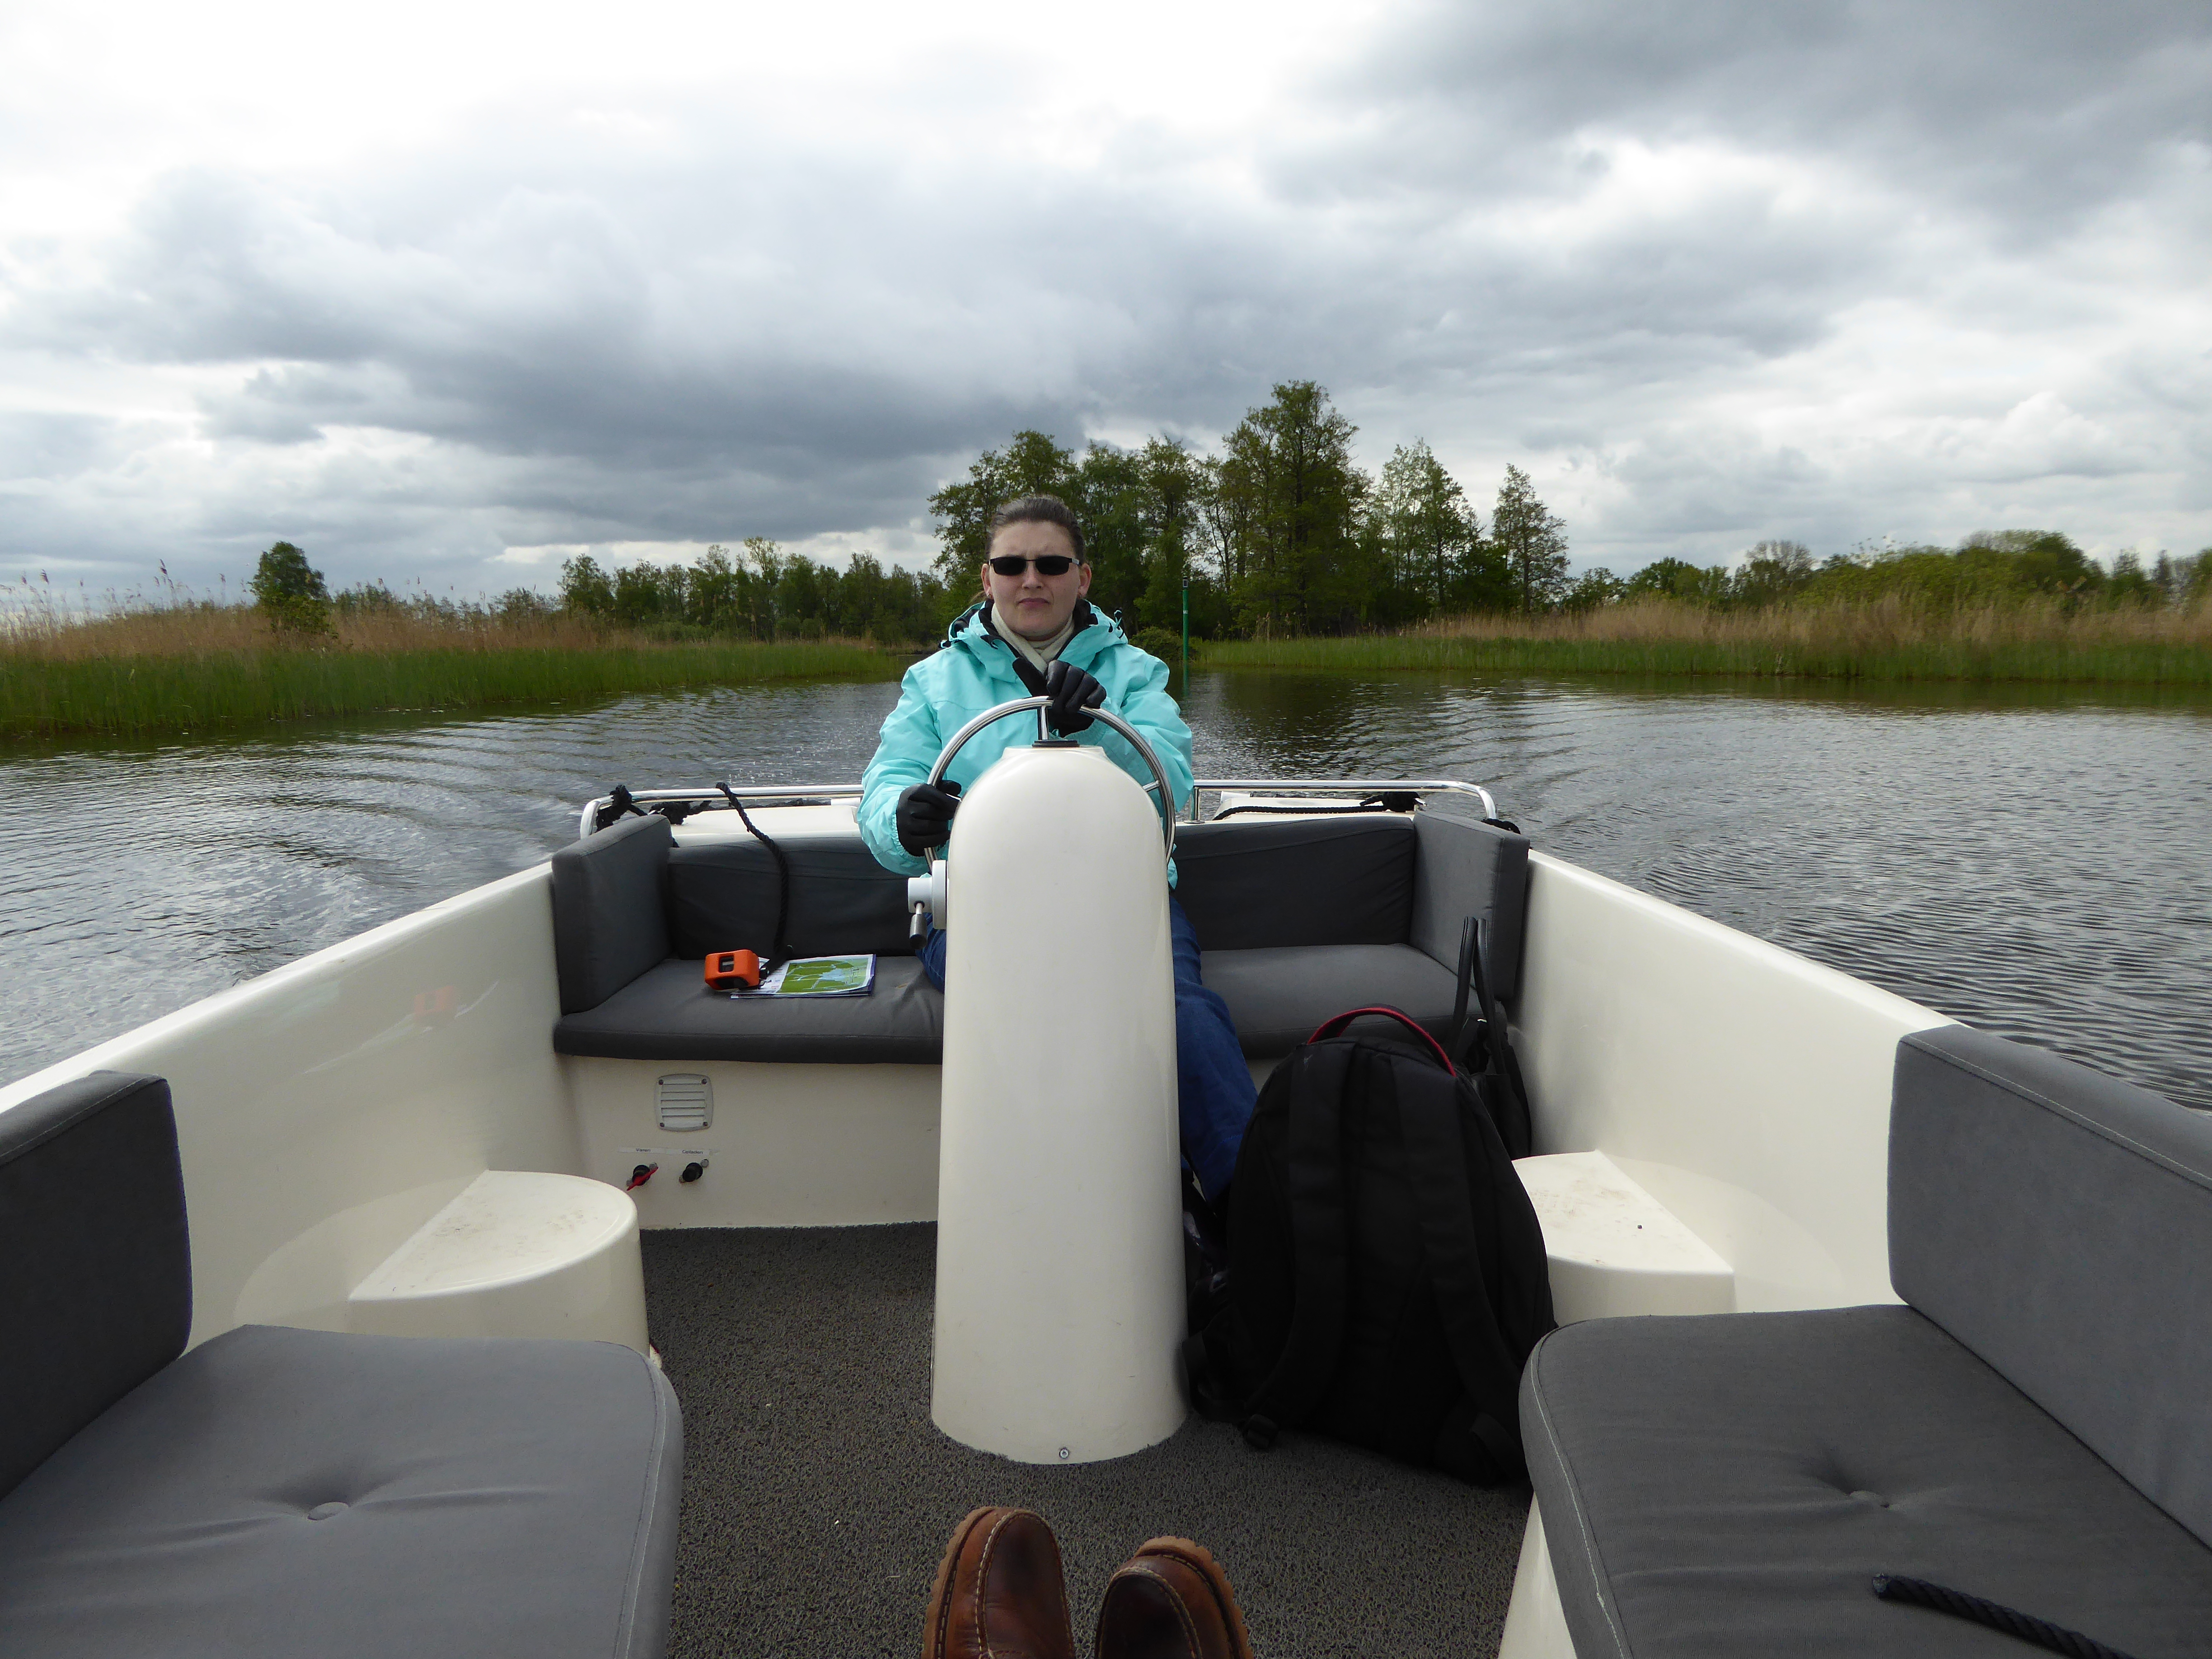 Giethoorn 2019 – Tag 2 – Bootstour